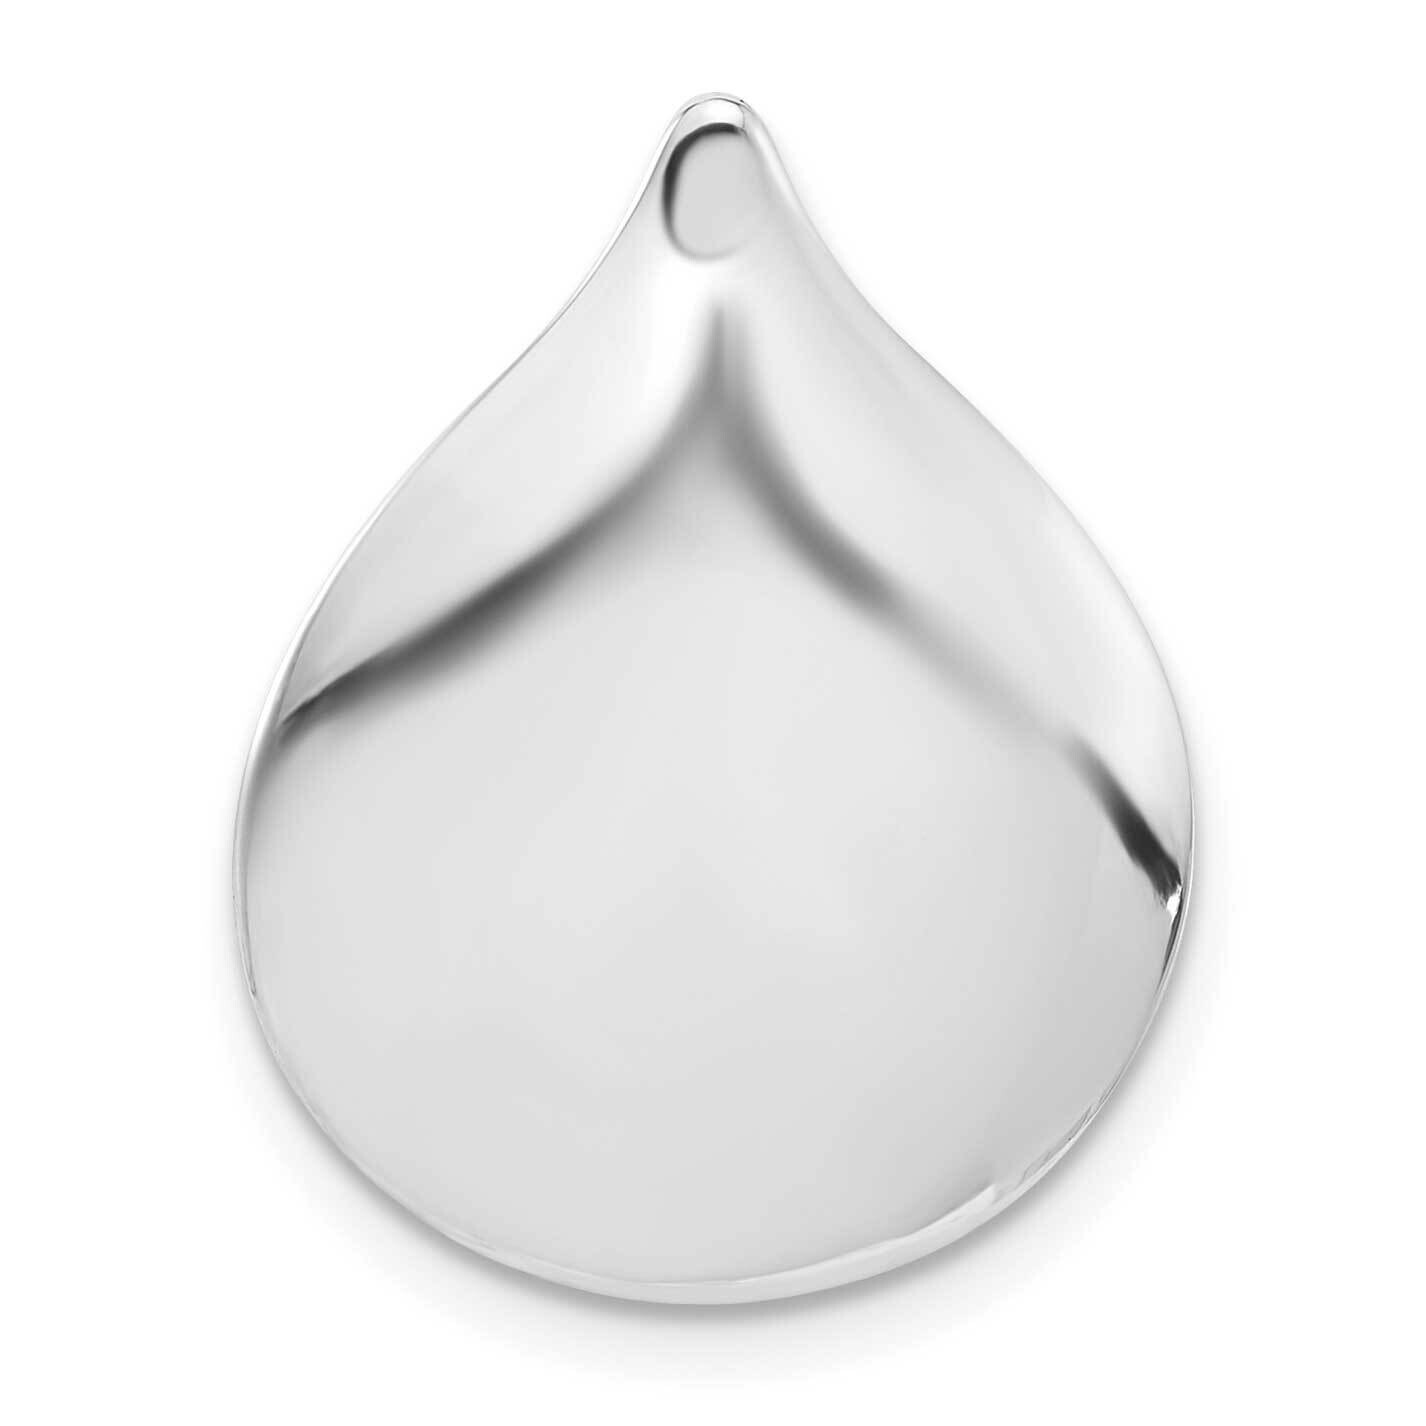 Polished Teardrop Chain Slide Sterling Silver Rhodium-Plated QP5803